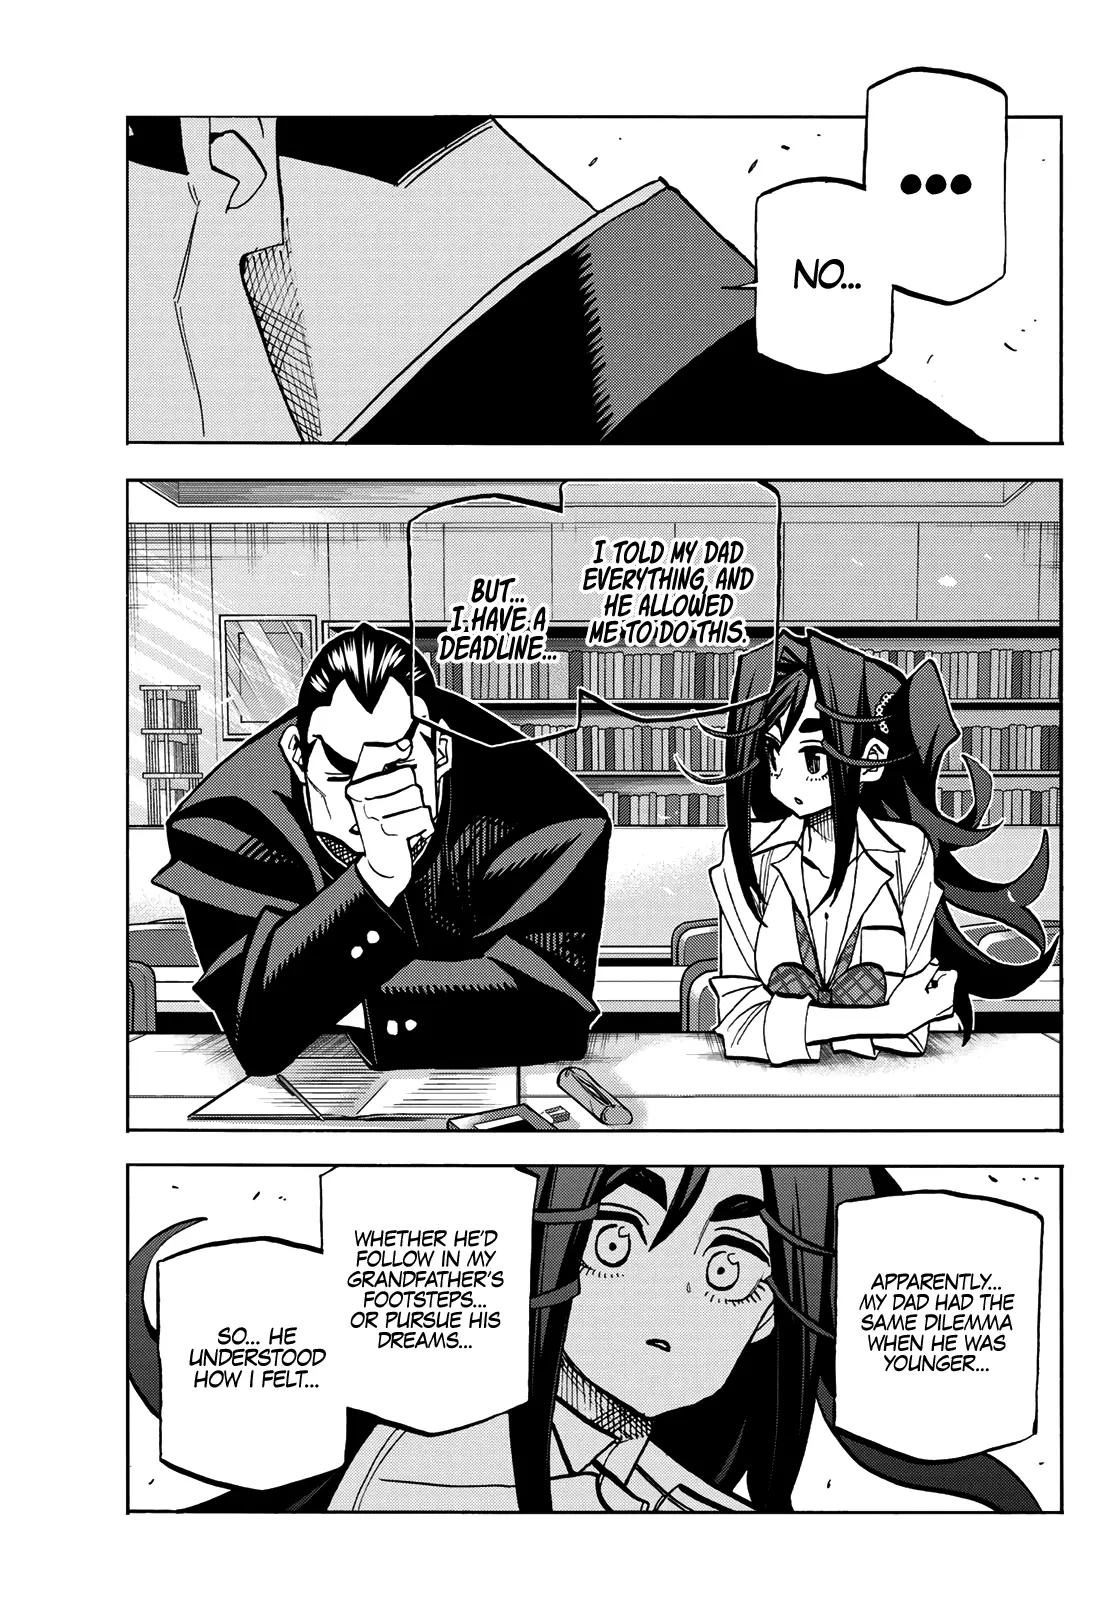 The Story Between A Dumb Prefect And A High School Girl With An Inappropriate Skirt Length - 42 page 13-cff2b985